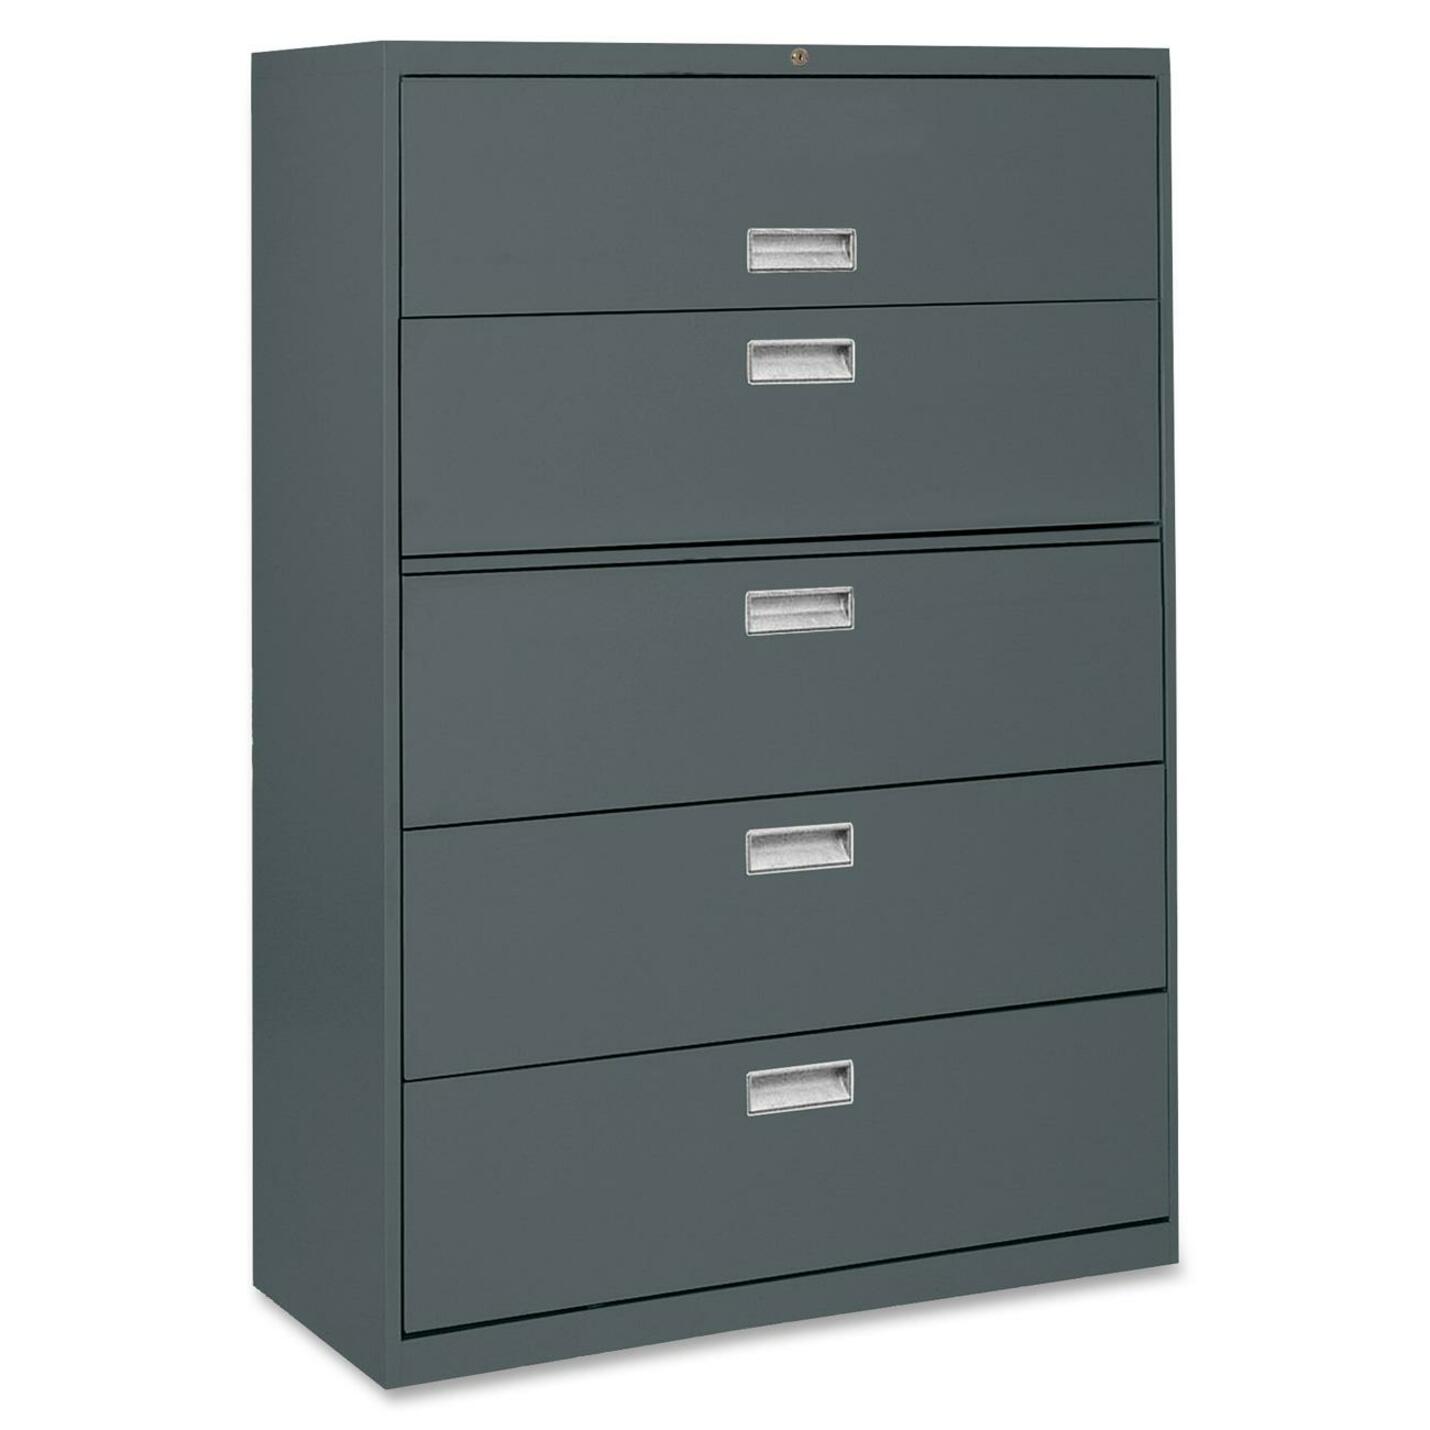 Sandusky Lee 600 Series Lateral File Cabinet, 5-Drawer - image 1 of 2